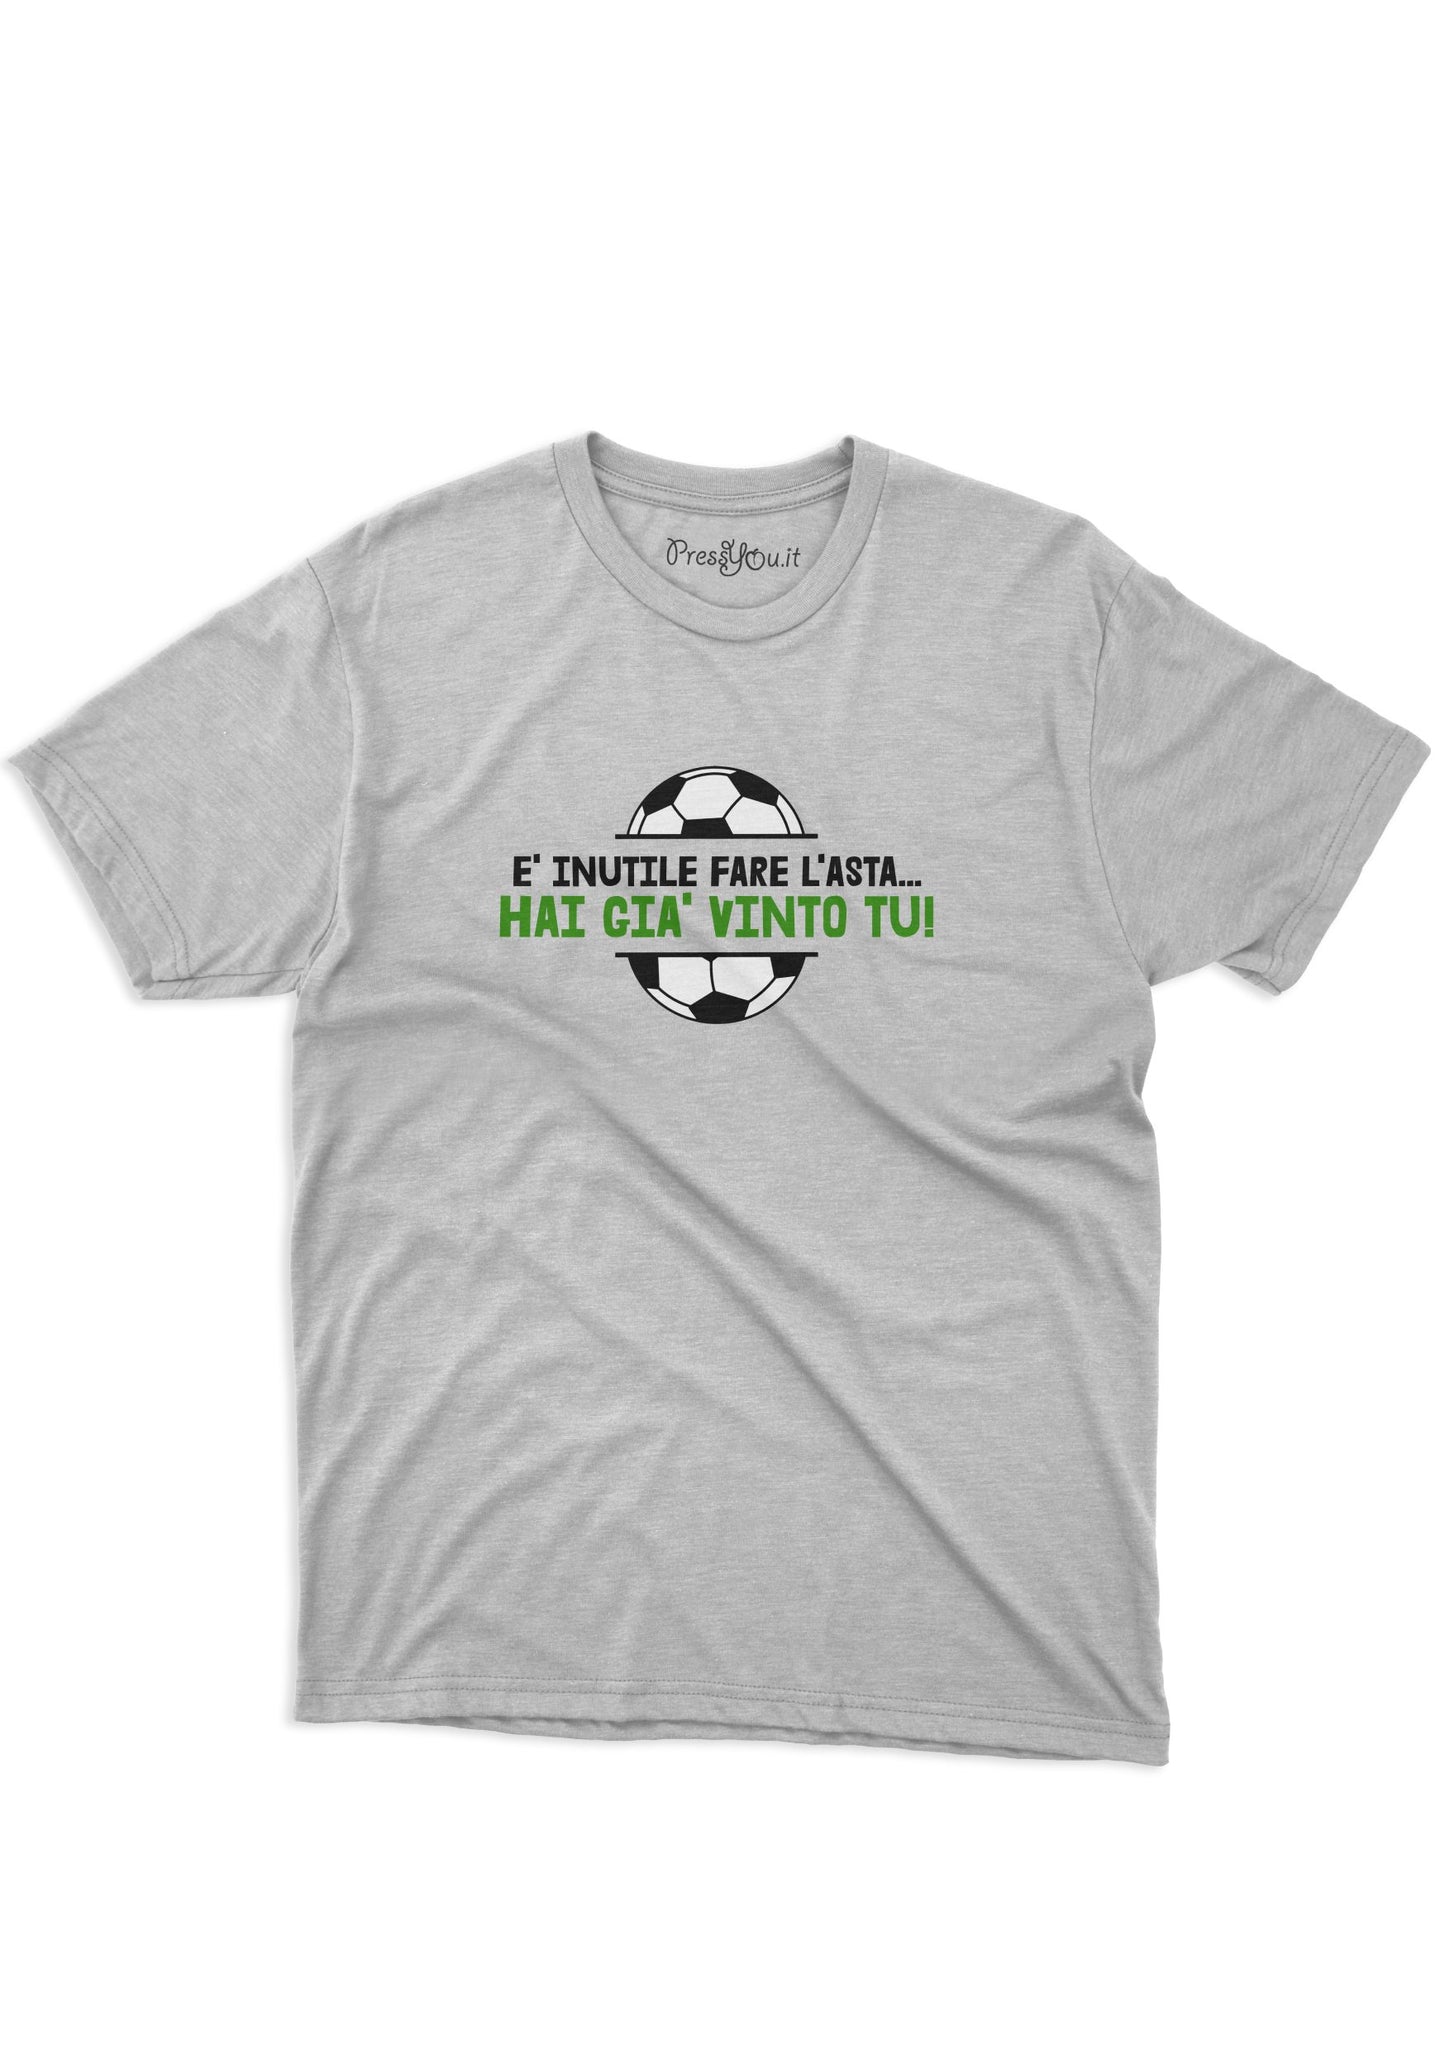 t-shirt - fantasy football and there's no point in bidding, you've already won, good luck, fun gift idea